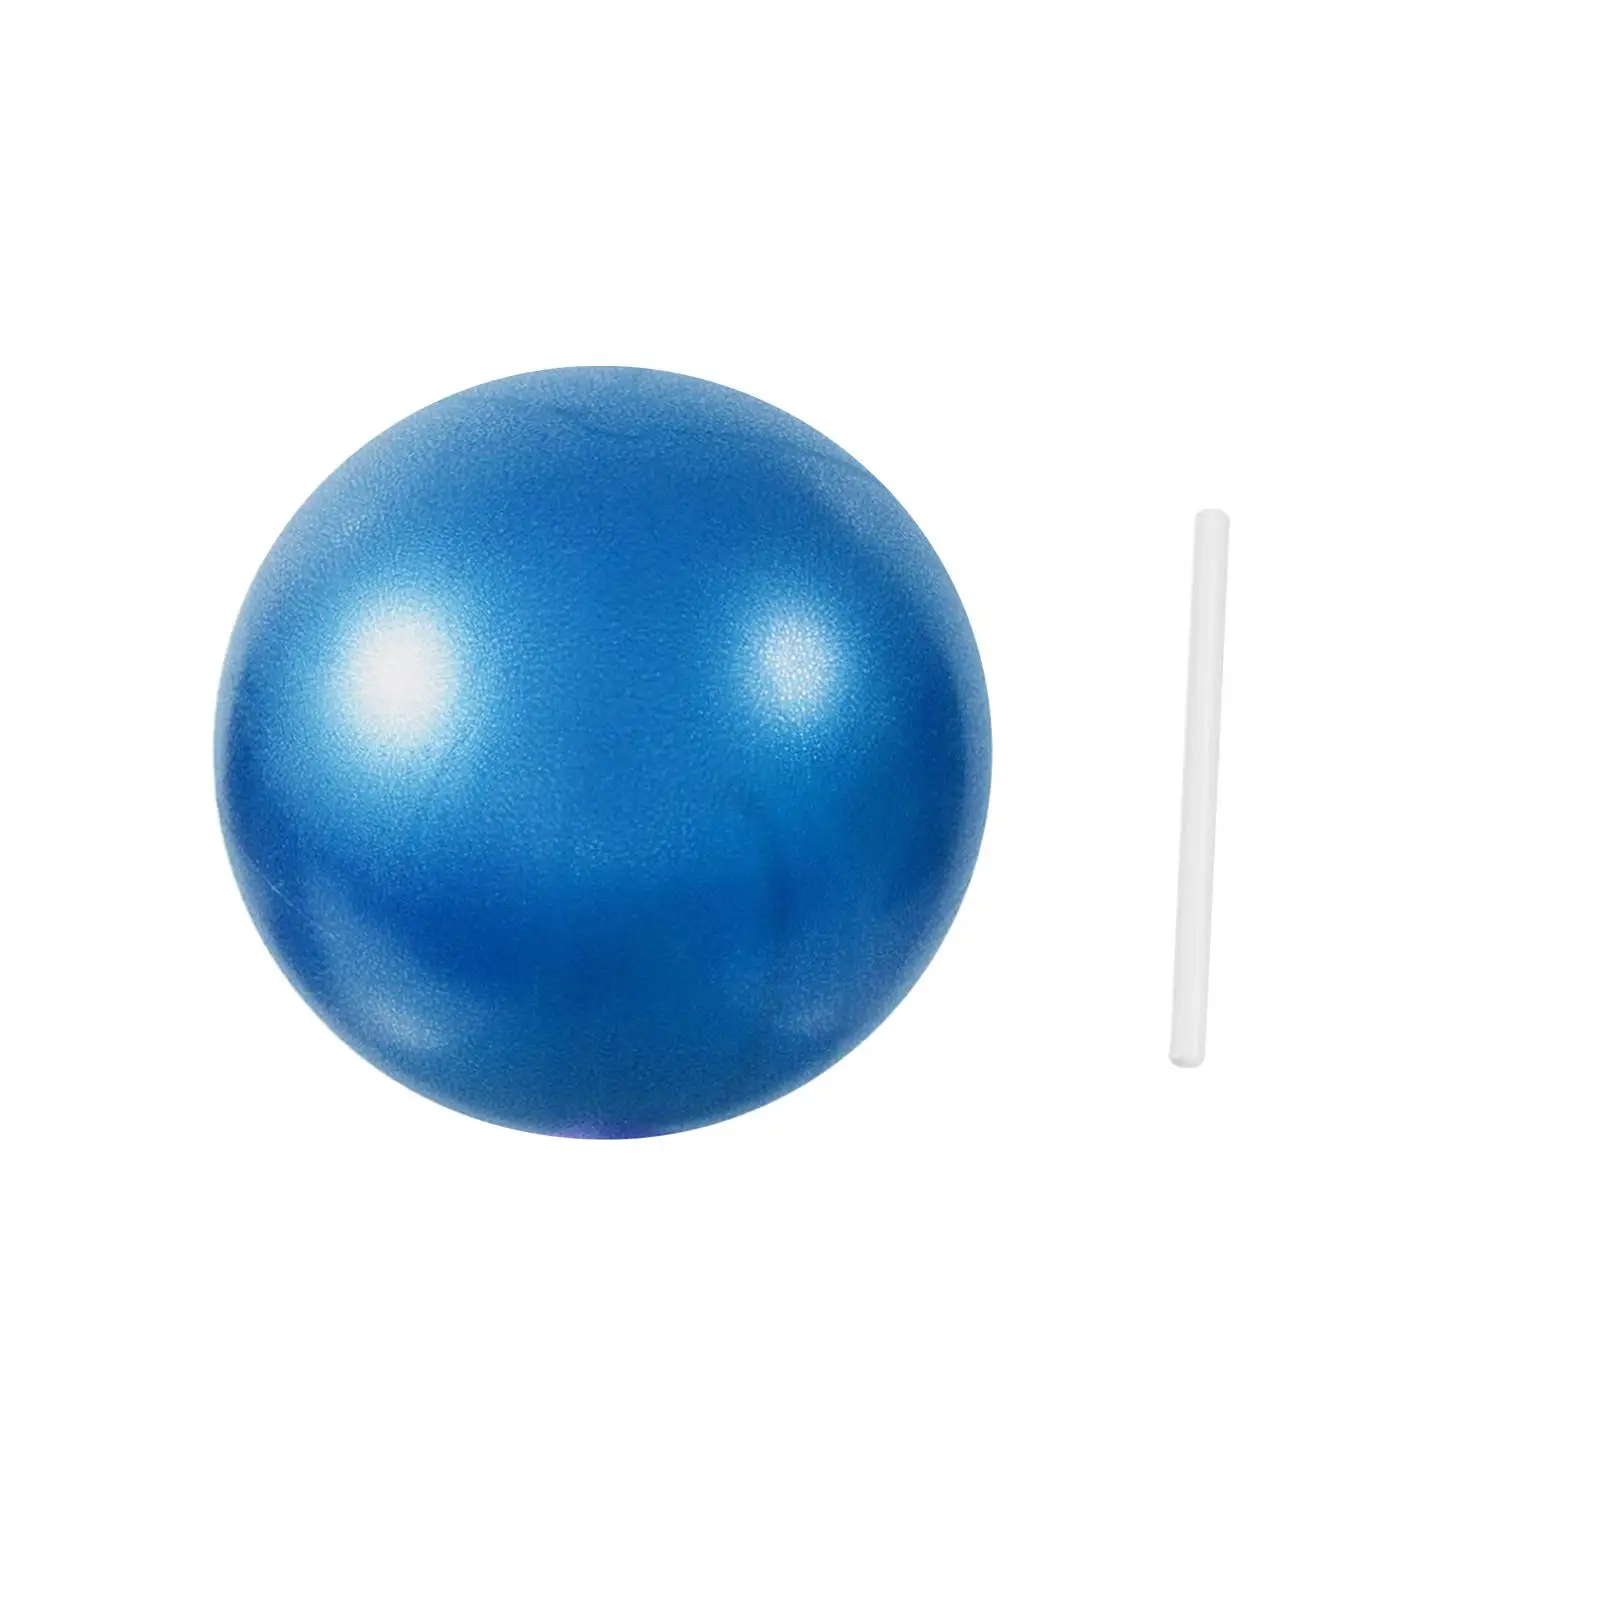 Small Pilates Ball 9 inch Workout Ball for Home Gym Fitness Stretching